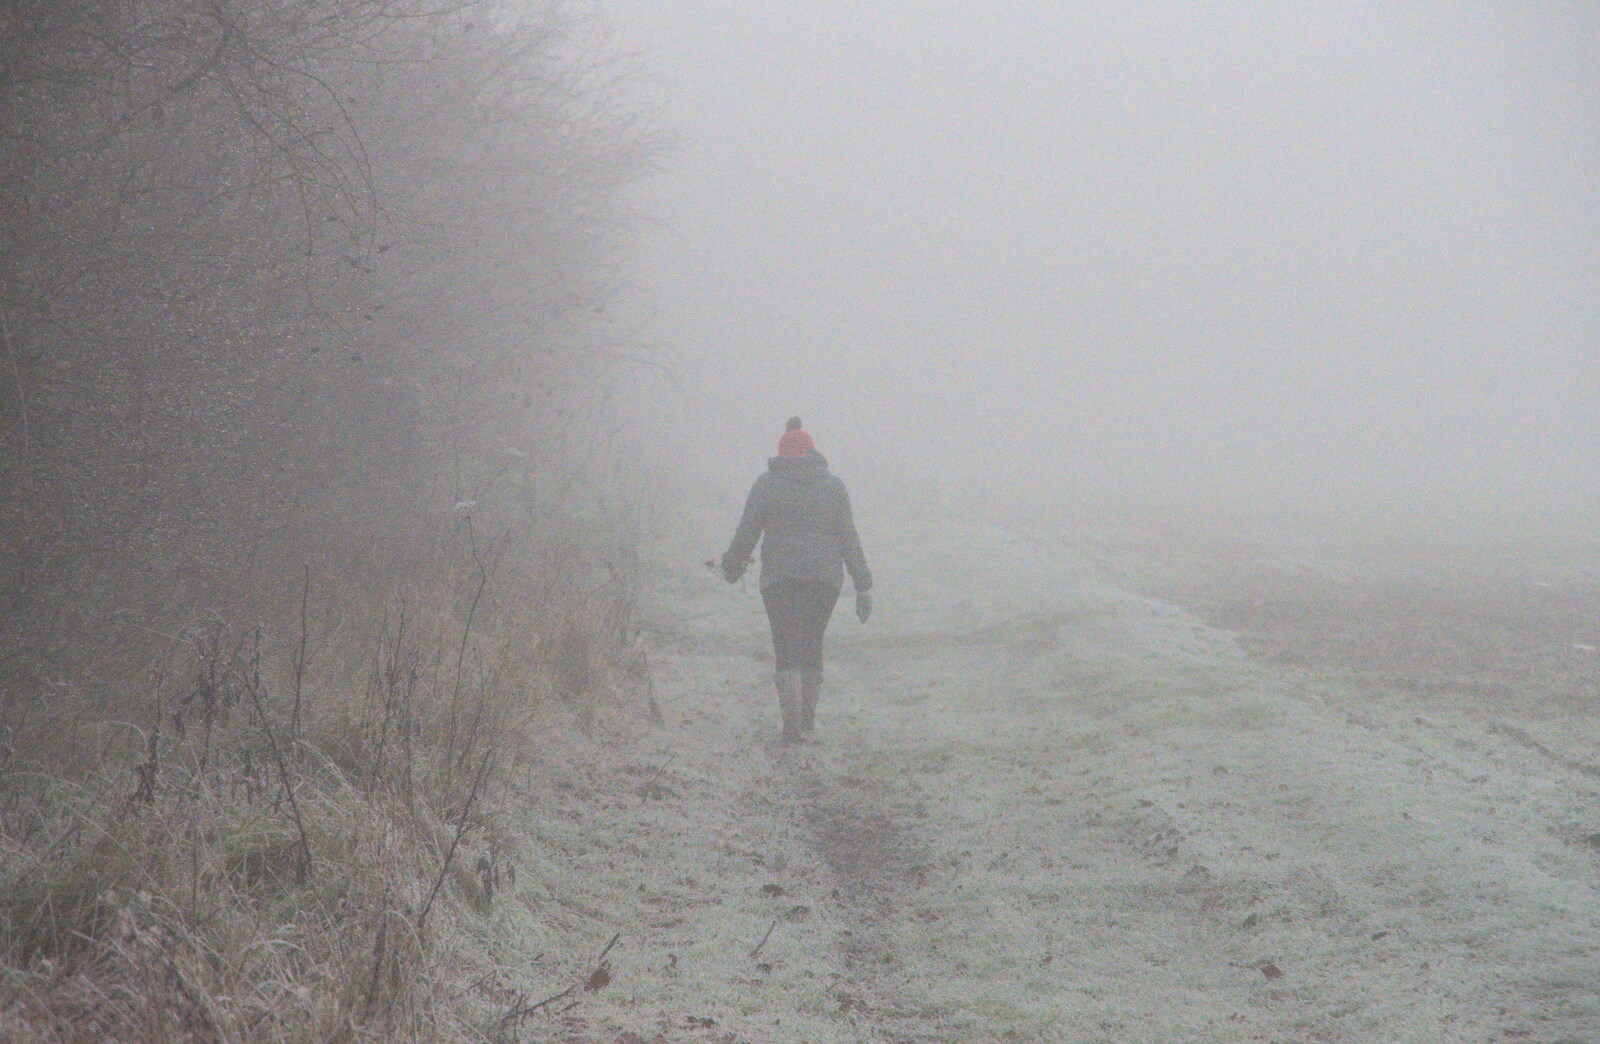 Isobel disappears into the mist from Fun With Ice in Lockdown, Brome, Suffolk - 10th January 2021